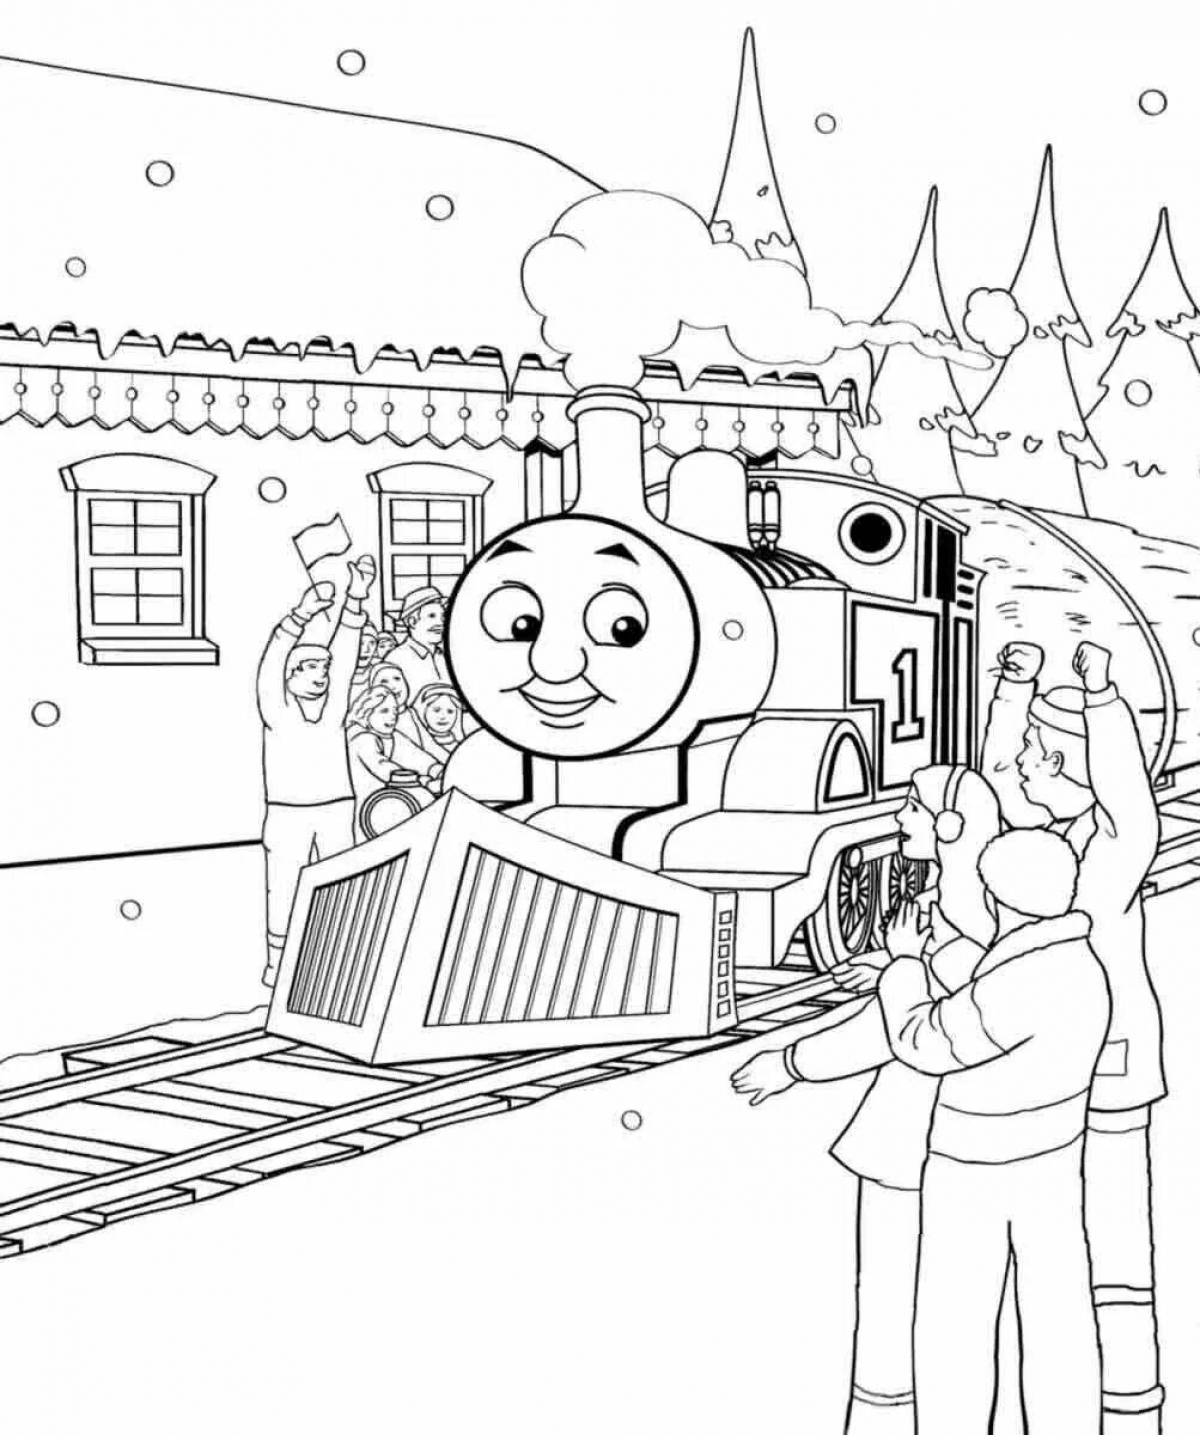 Great train station coloring pages for kids